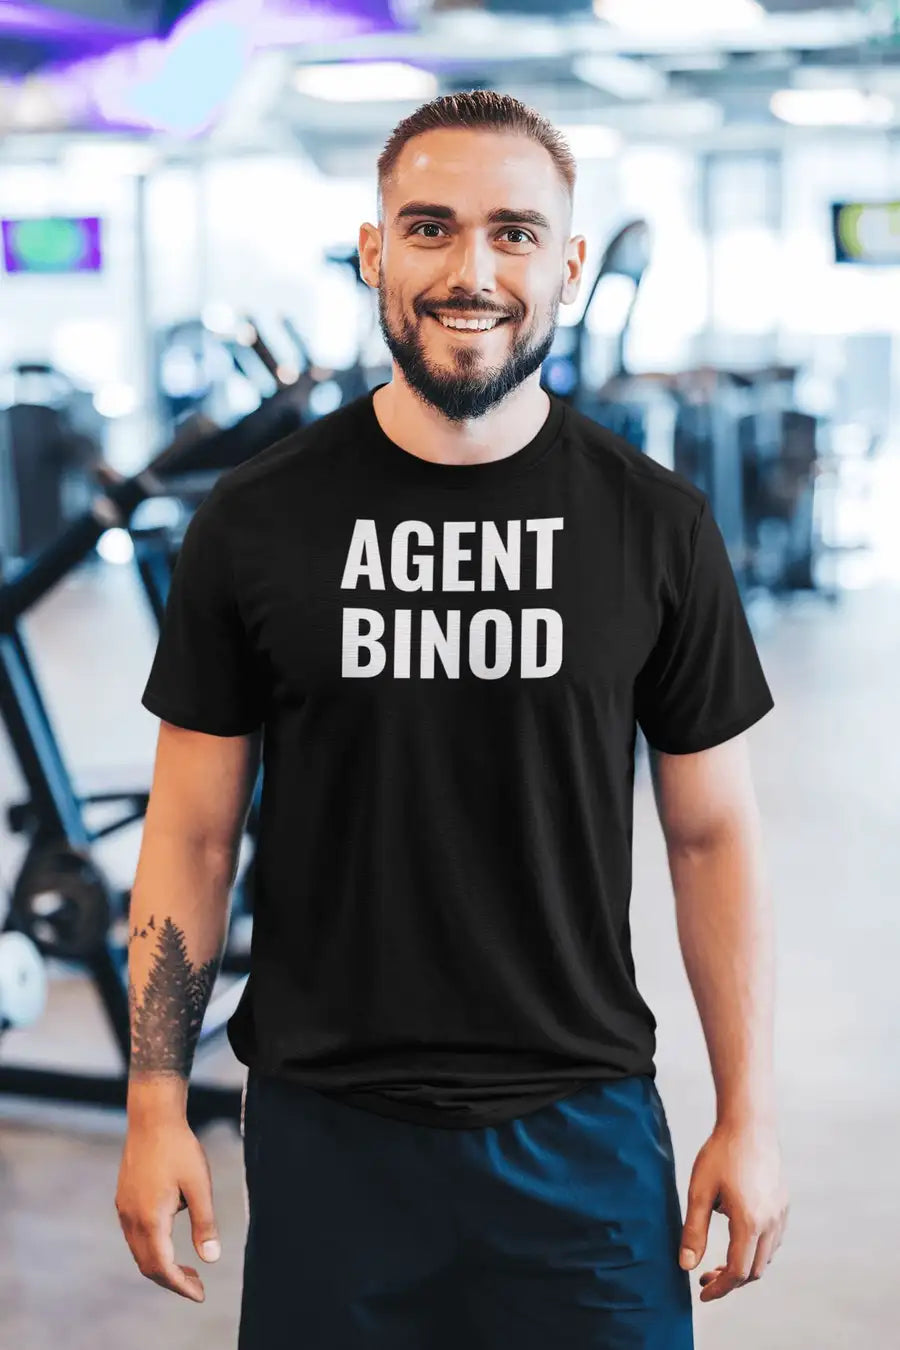 Agent Binod T Shirt for Men and Women | Premium Design | Catch My Drift India - Catch My Drift India Clothing black, bollywood, clothing, funny, made in india, multi colour, shirt, t shirt, t